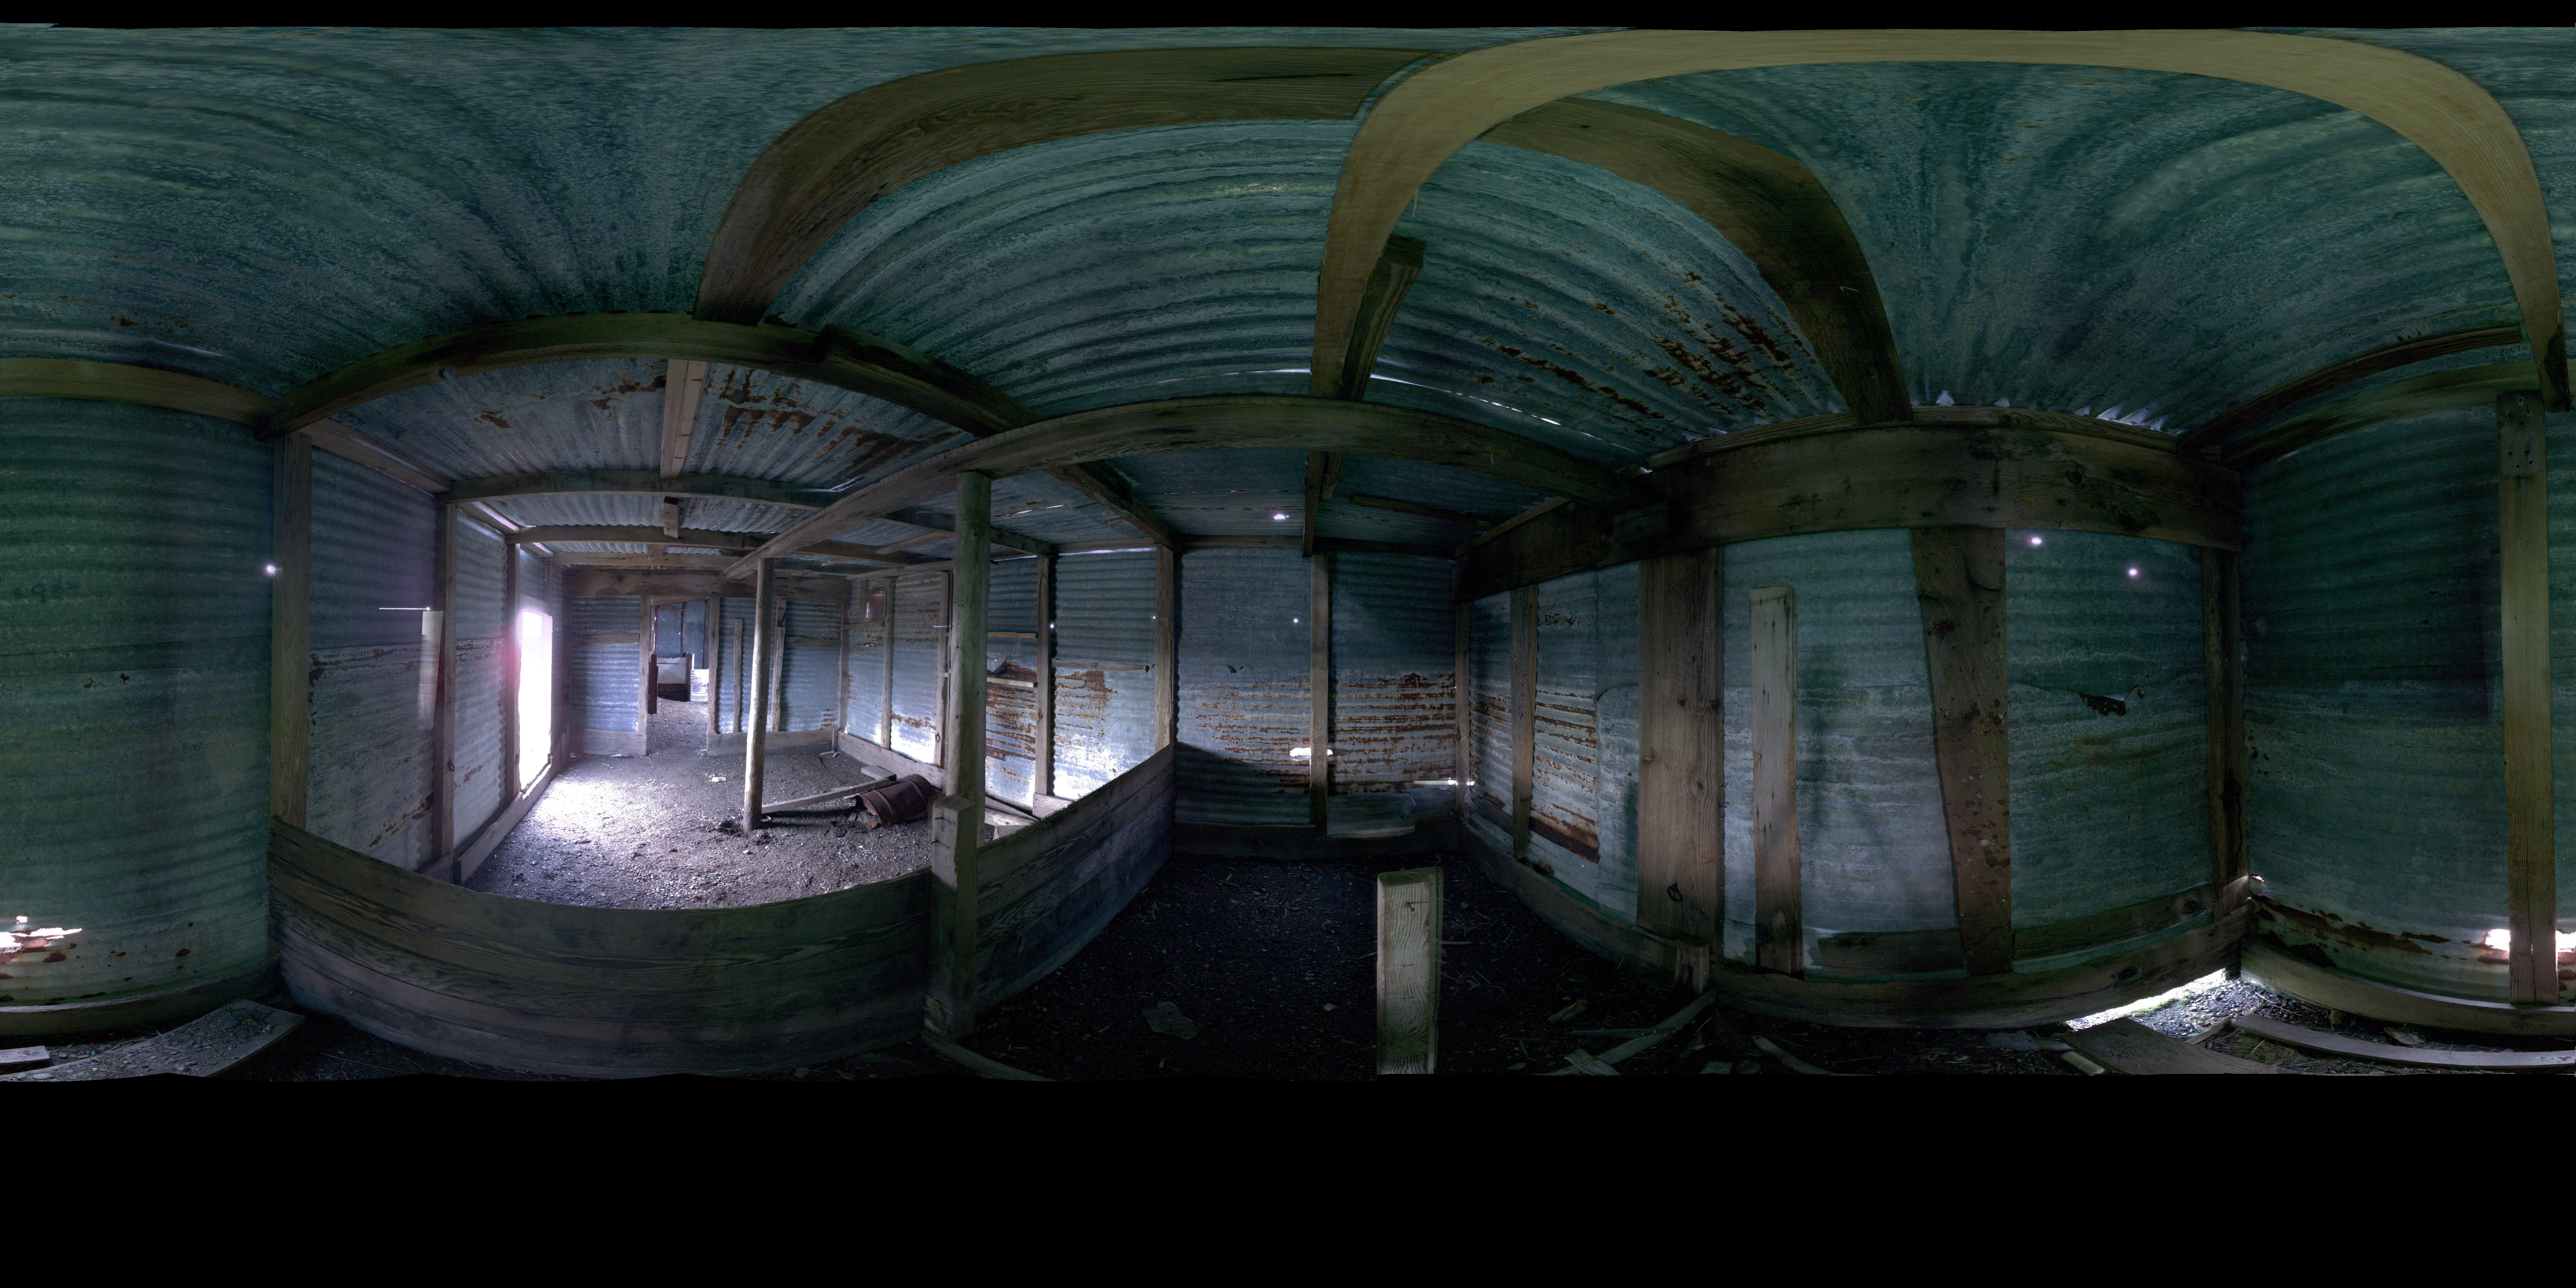 Panoramic view of the RCMP Dog Kennels and Run from the Leica BKL 360, scanning location 8.